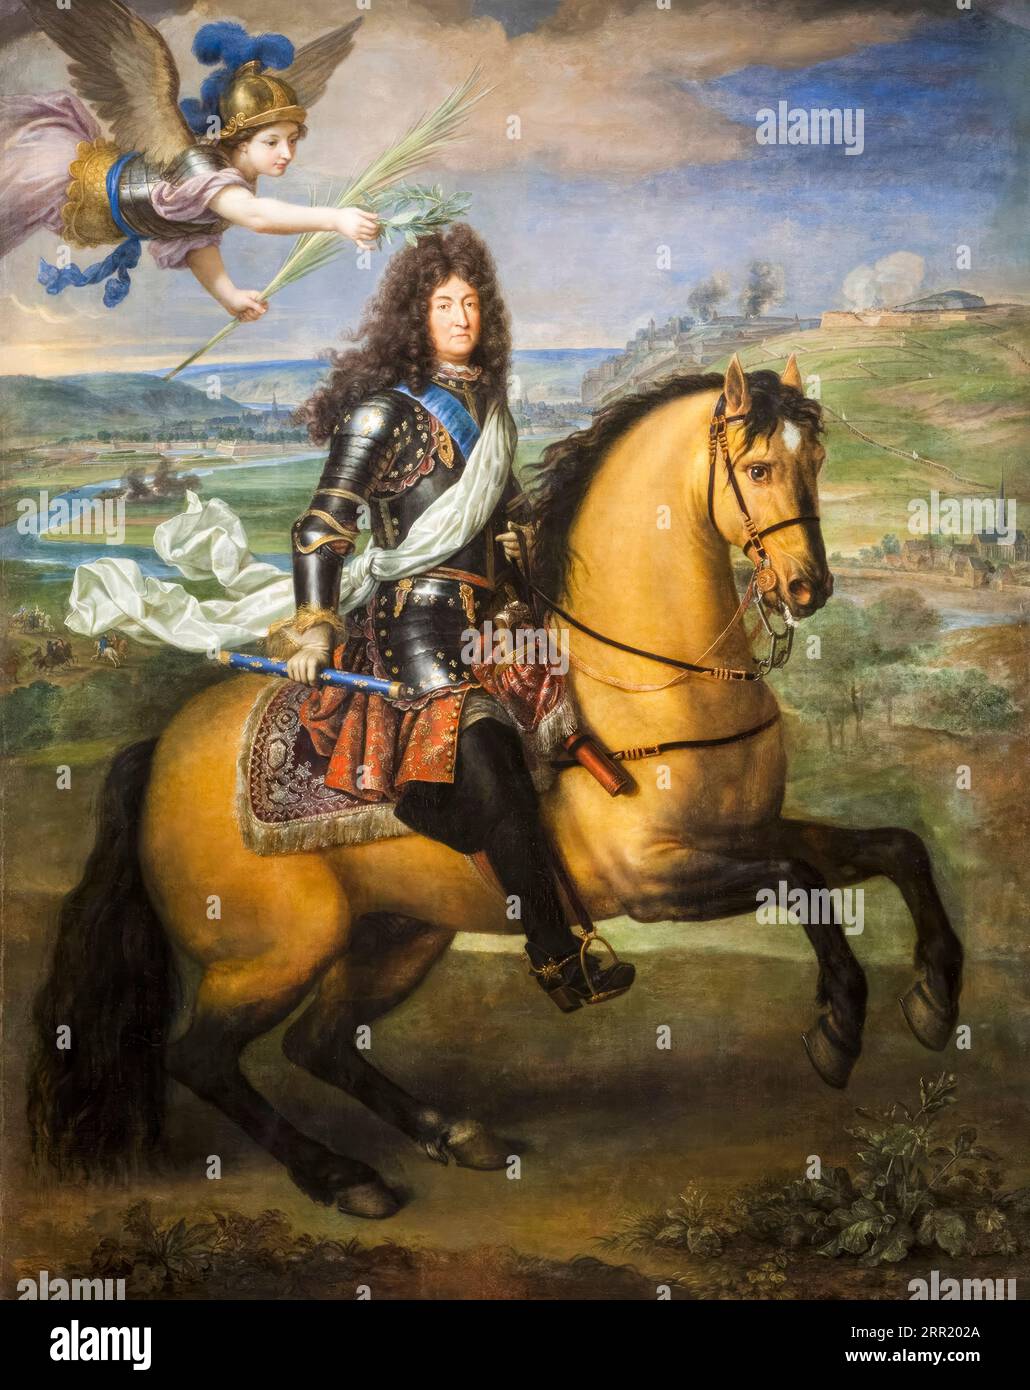 Louis XIV of France (1638-1715), on horseback crowned by Victory before the Siege of Namur (1692), equestrian portrait painting in oil on canvas by Pierre Mignard, circa 1694 Stock Photo